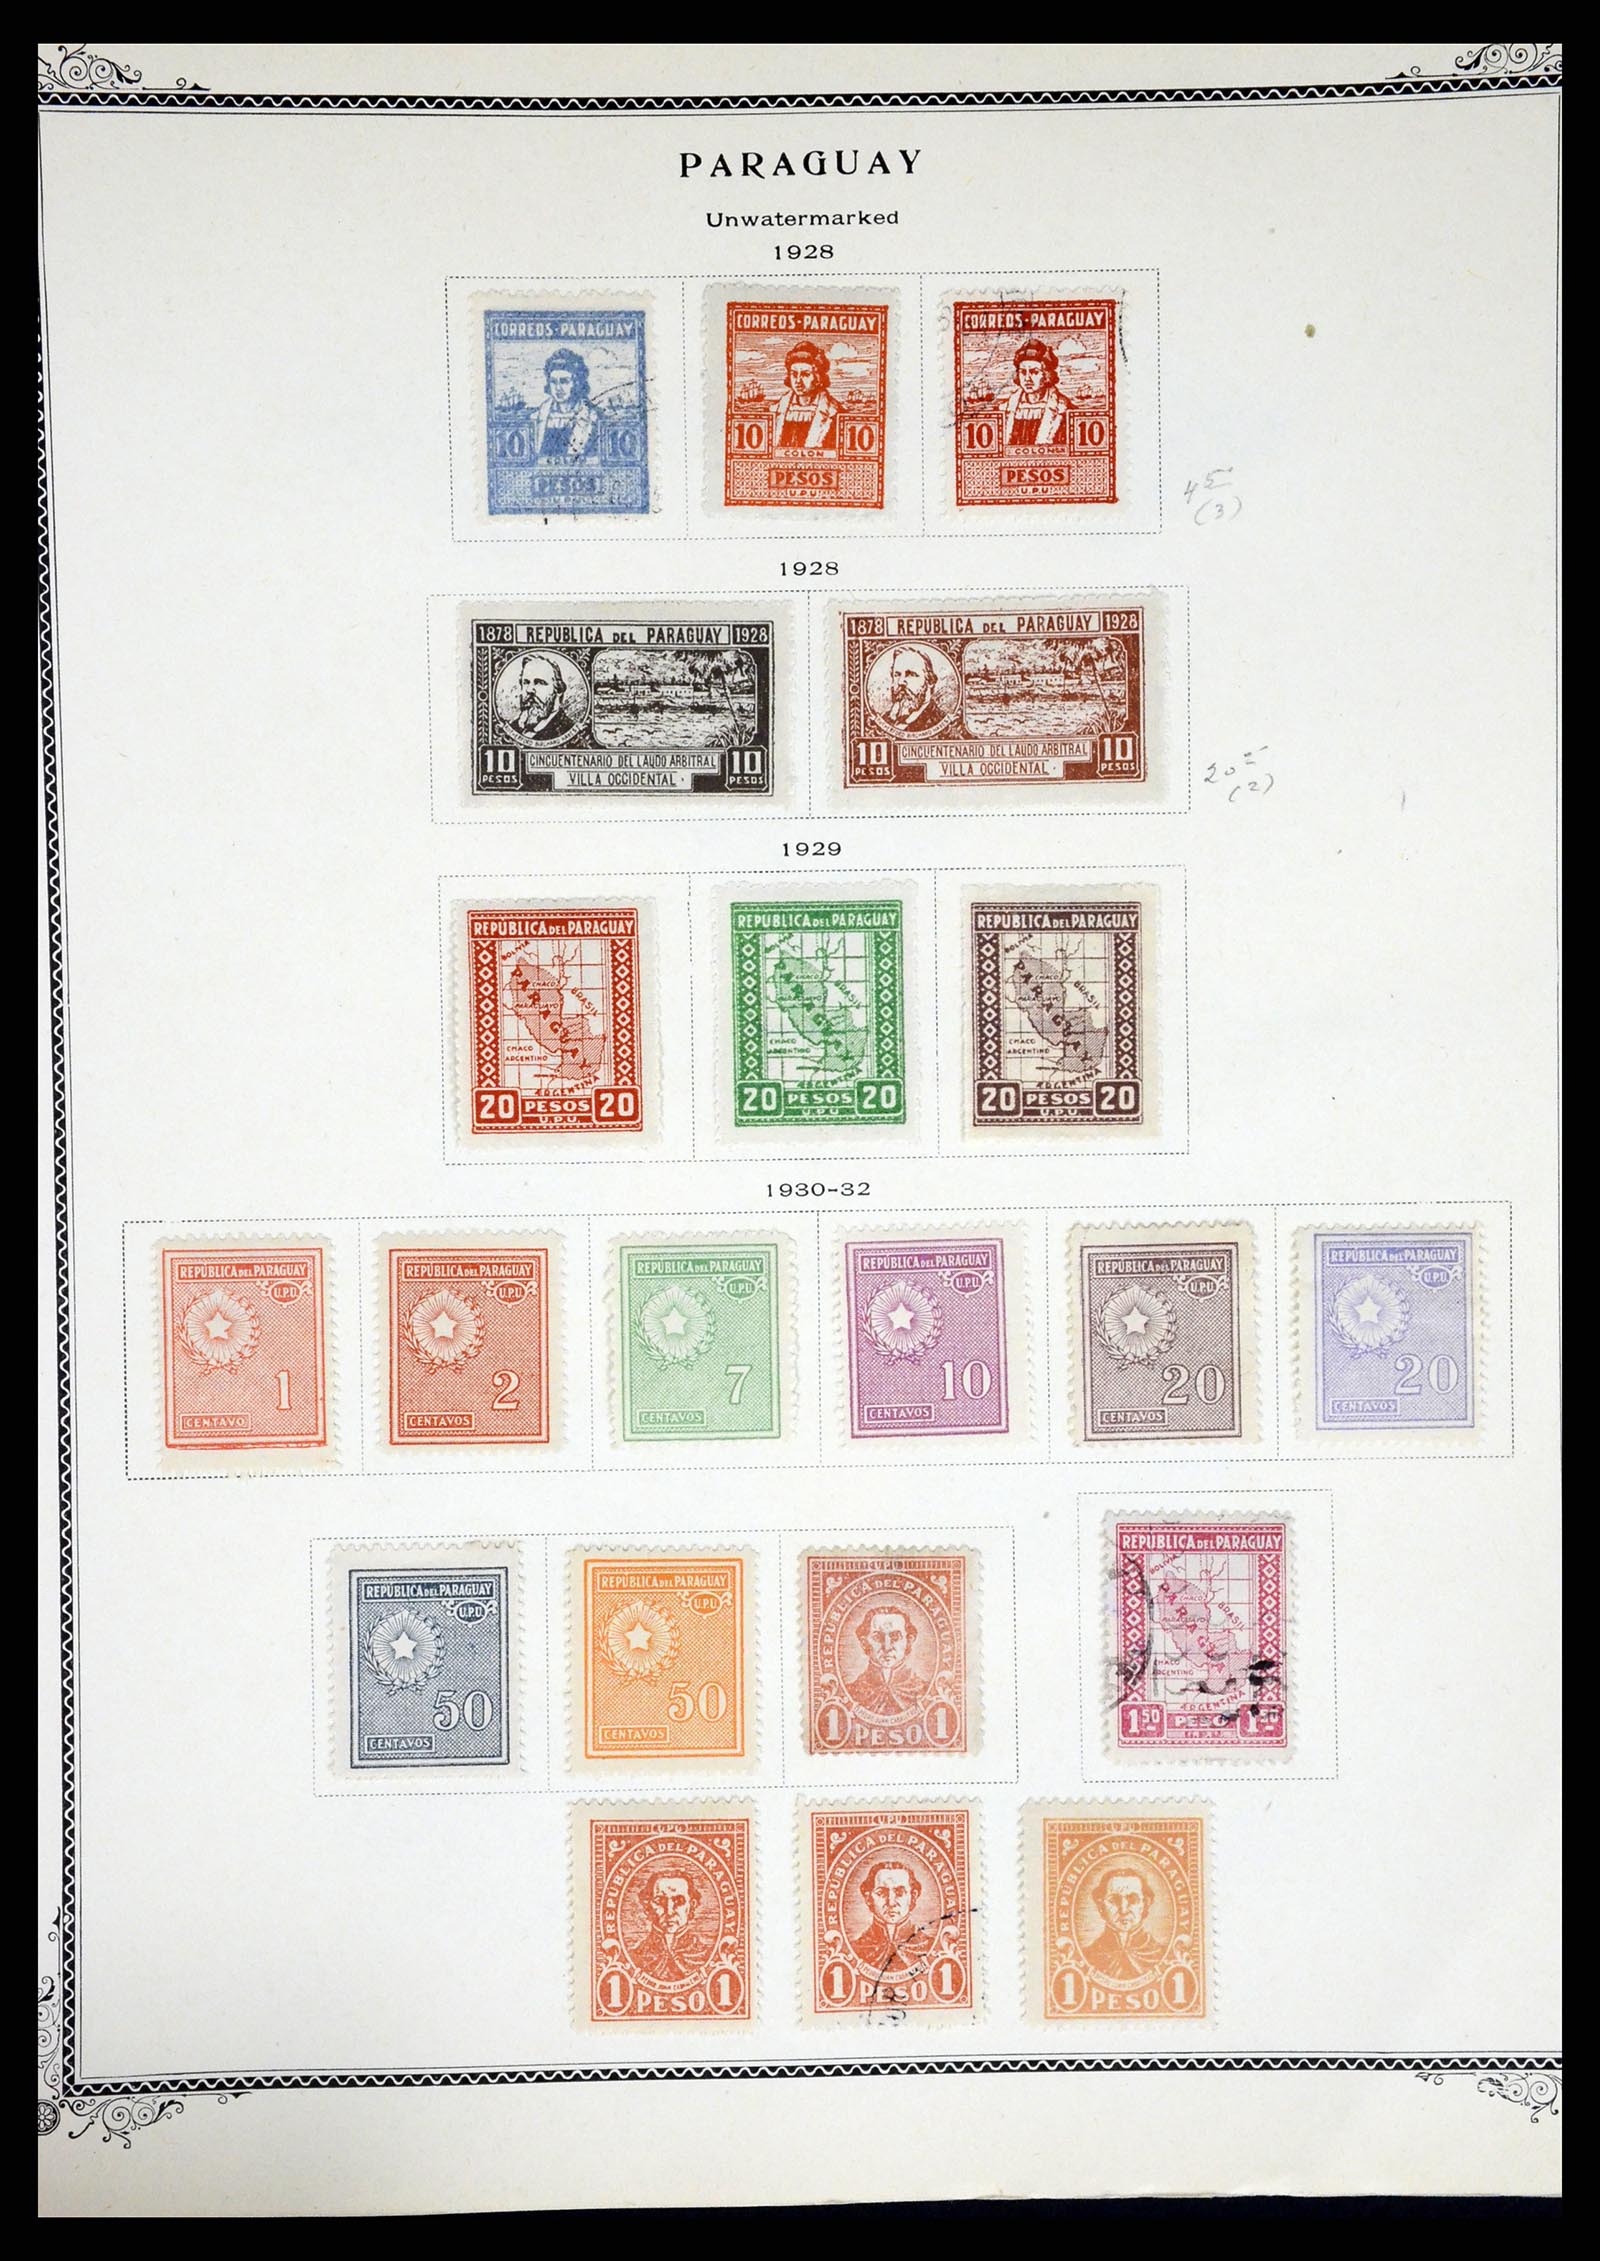 37227 024 - Stamp collection 37227 Paraguay 1870-2000.